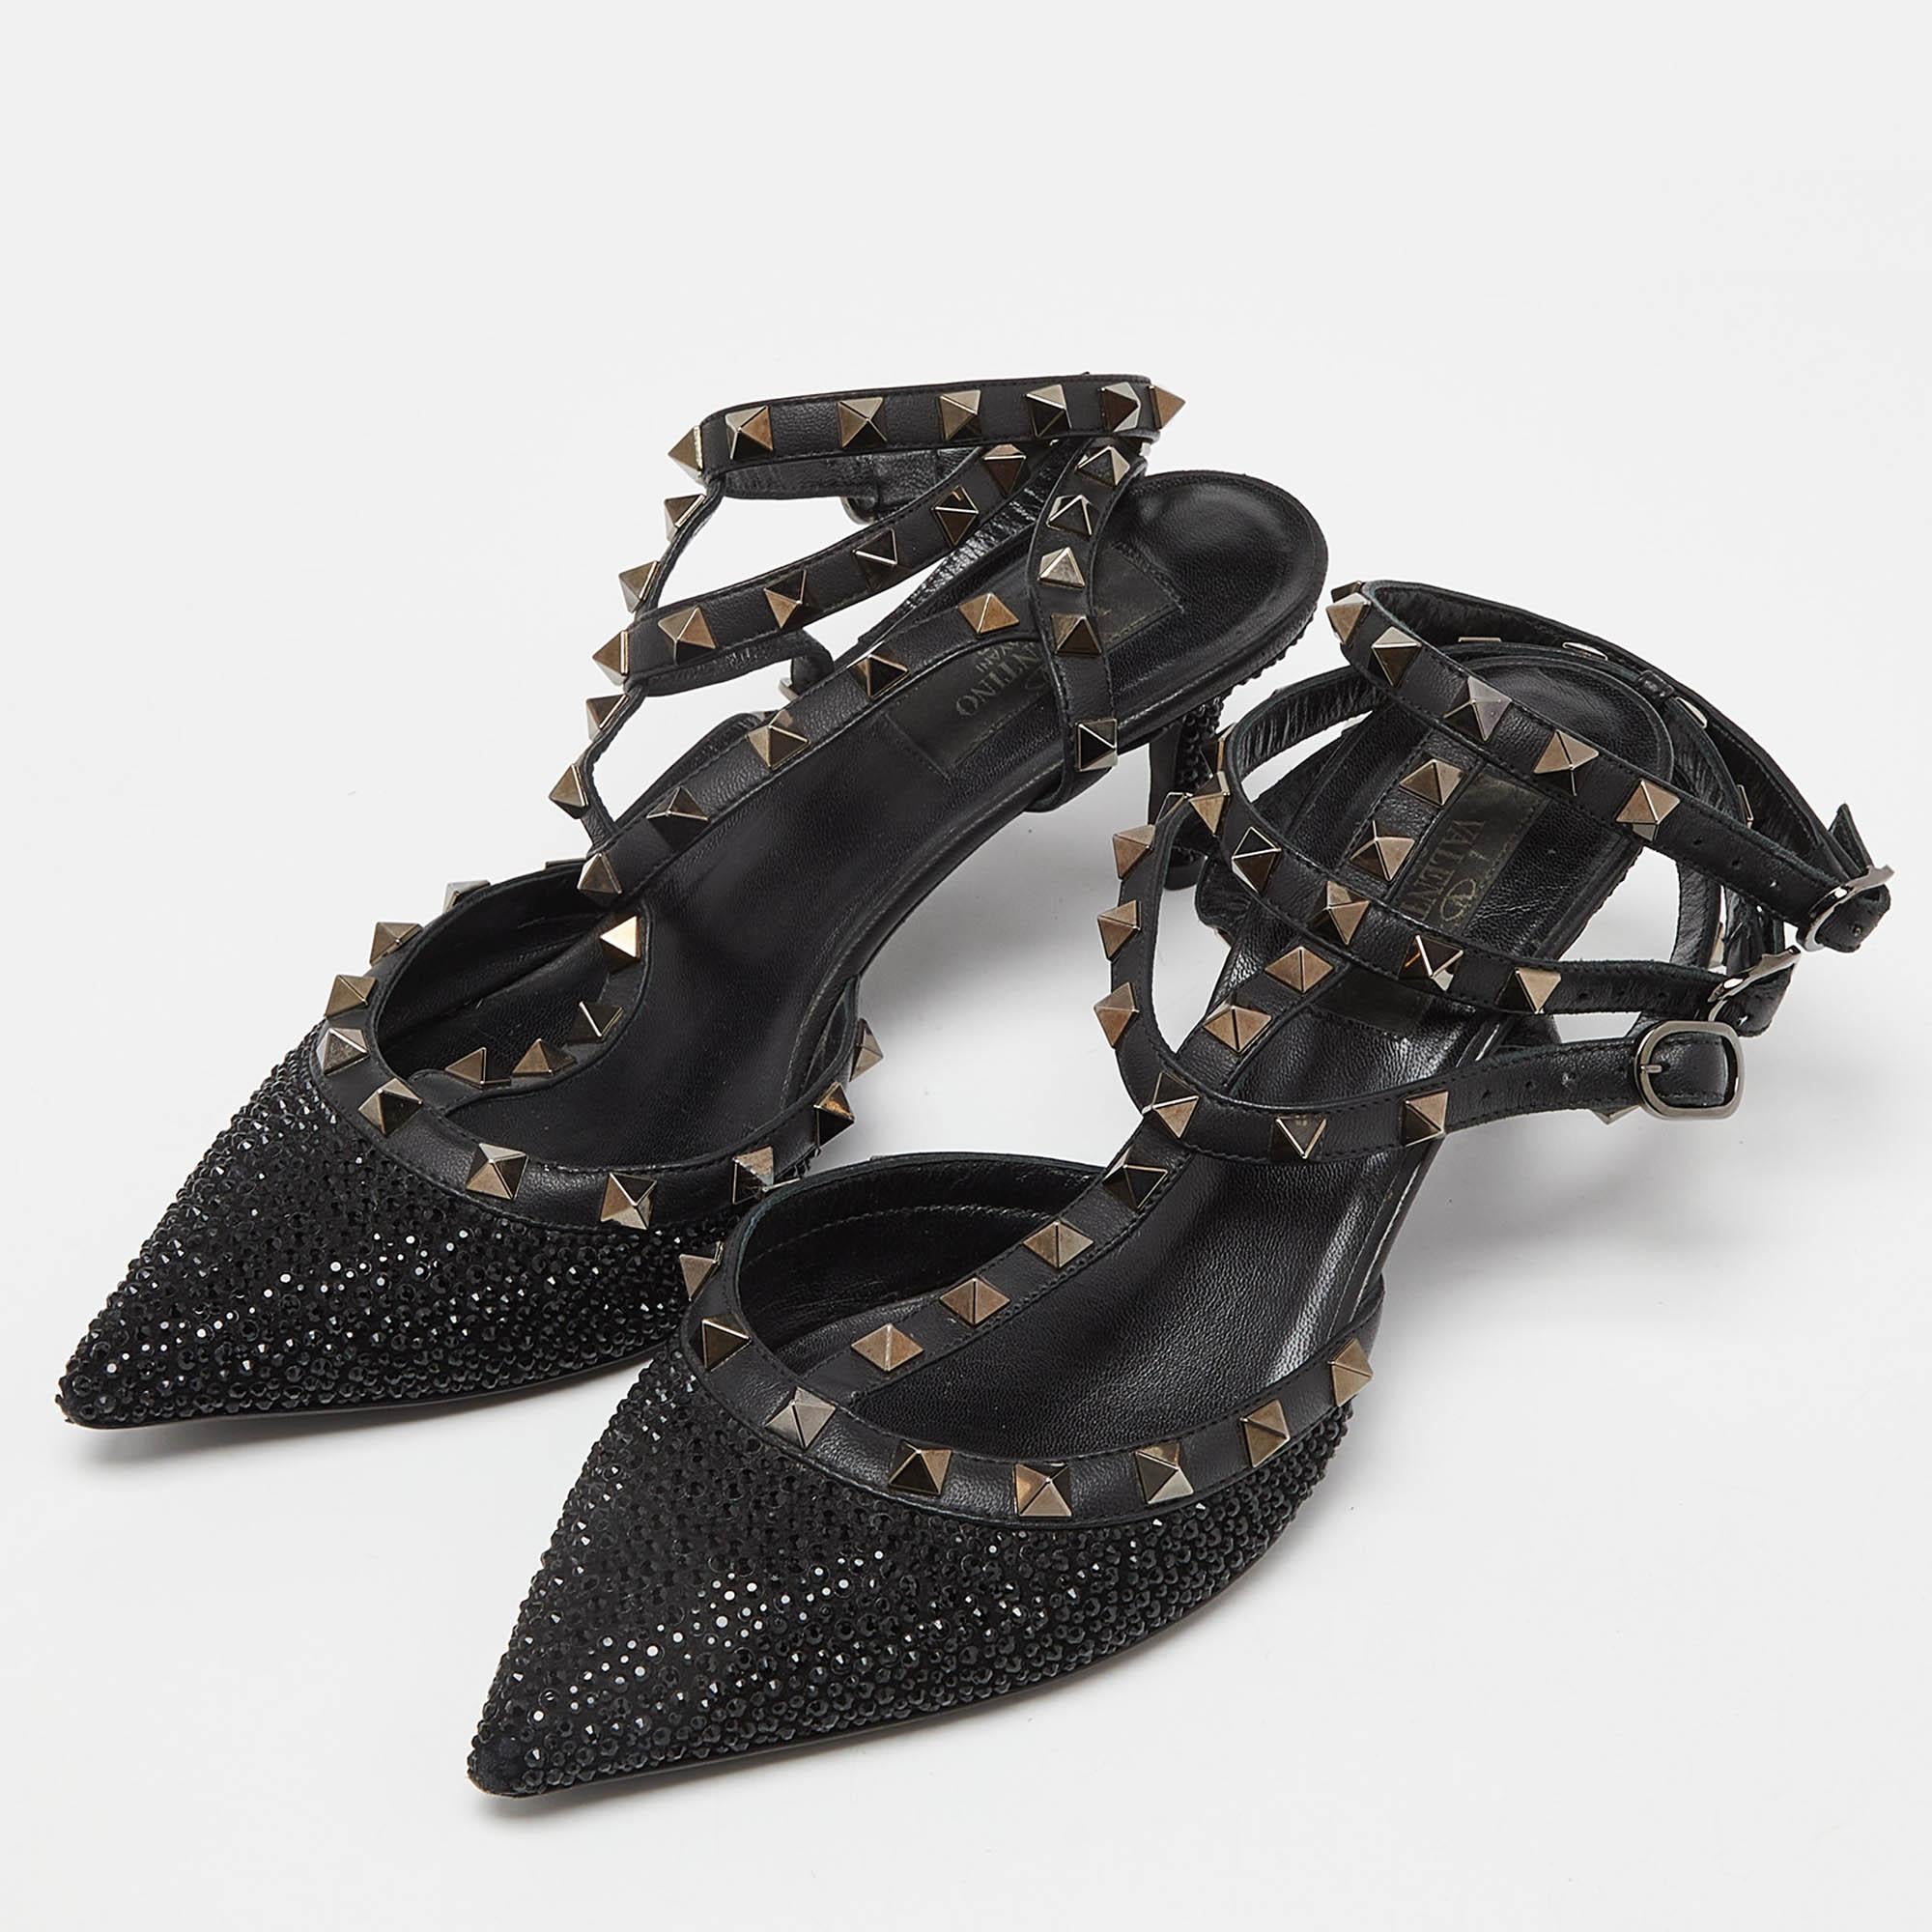 Valentino Black Leather Crystal Embellished Rockstud Ankle Strap Sandals Size 38 In Good Condition For Sale In Dubai, Al Qouz 2